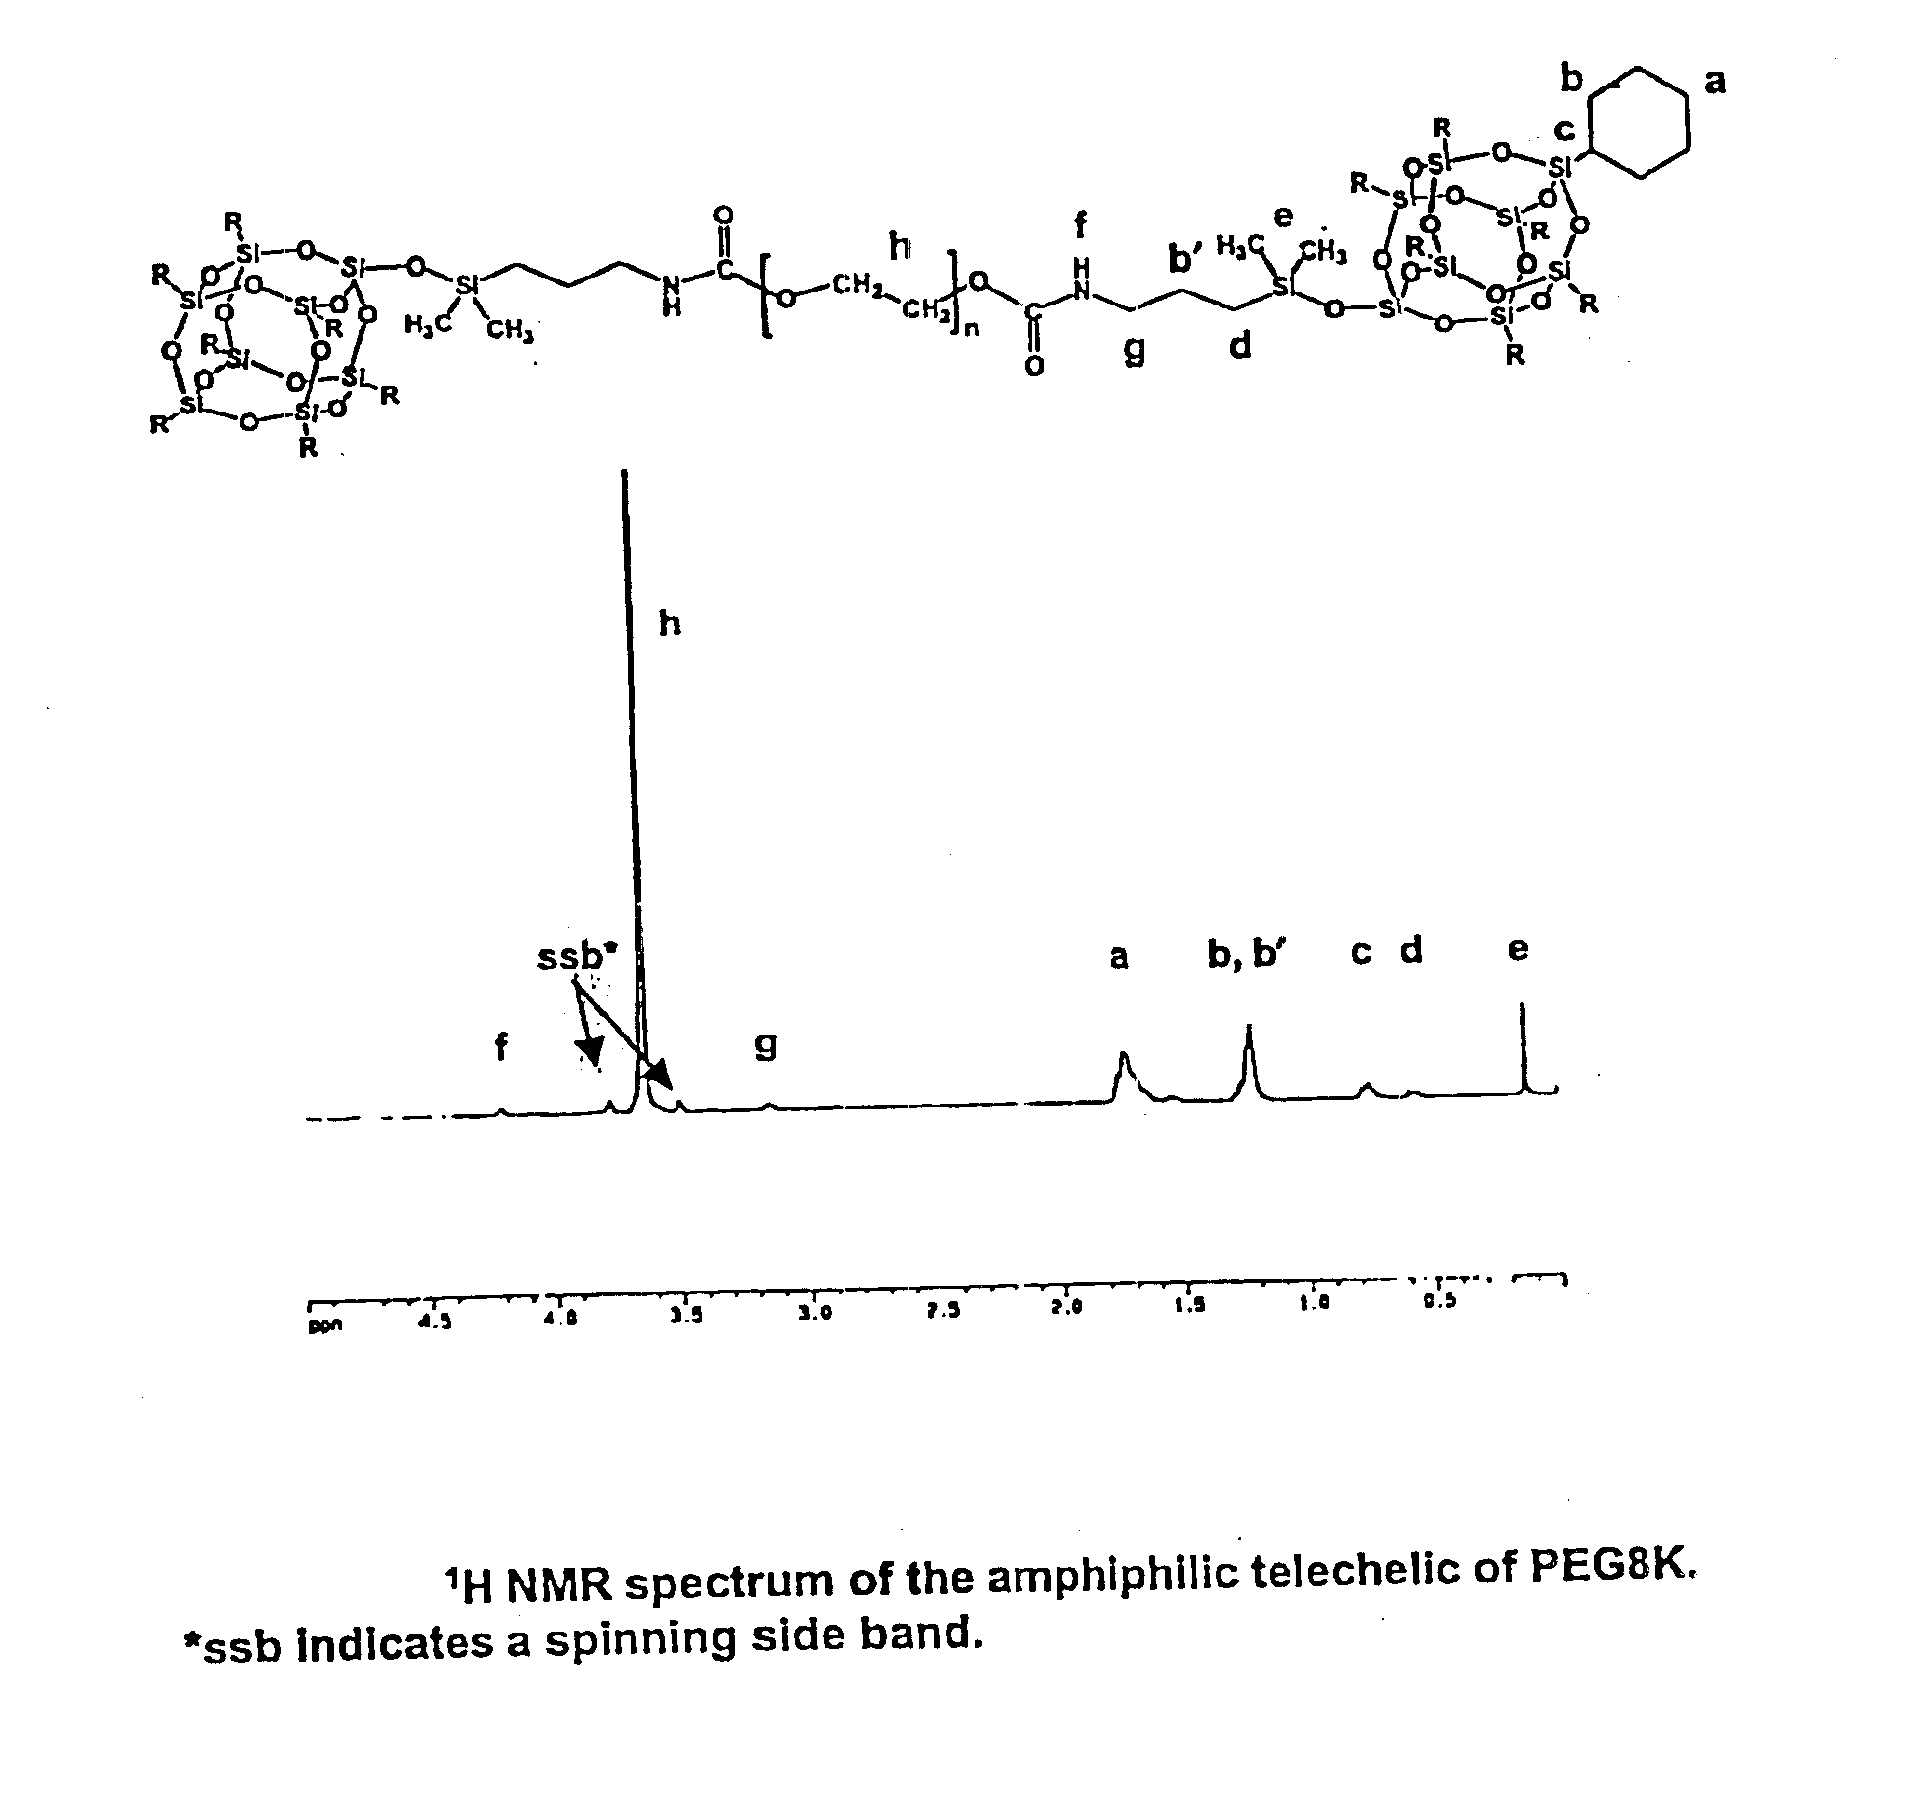 Nonionic telechelic polymers incorporating polyhedral oligosilsesquioxane (POSS) and uses thereof